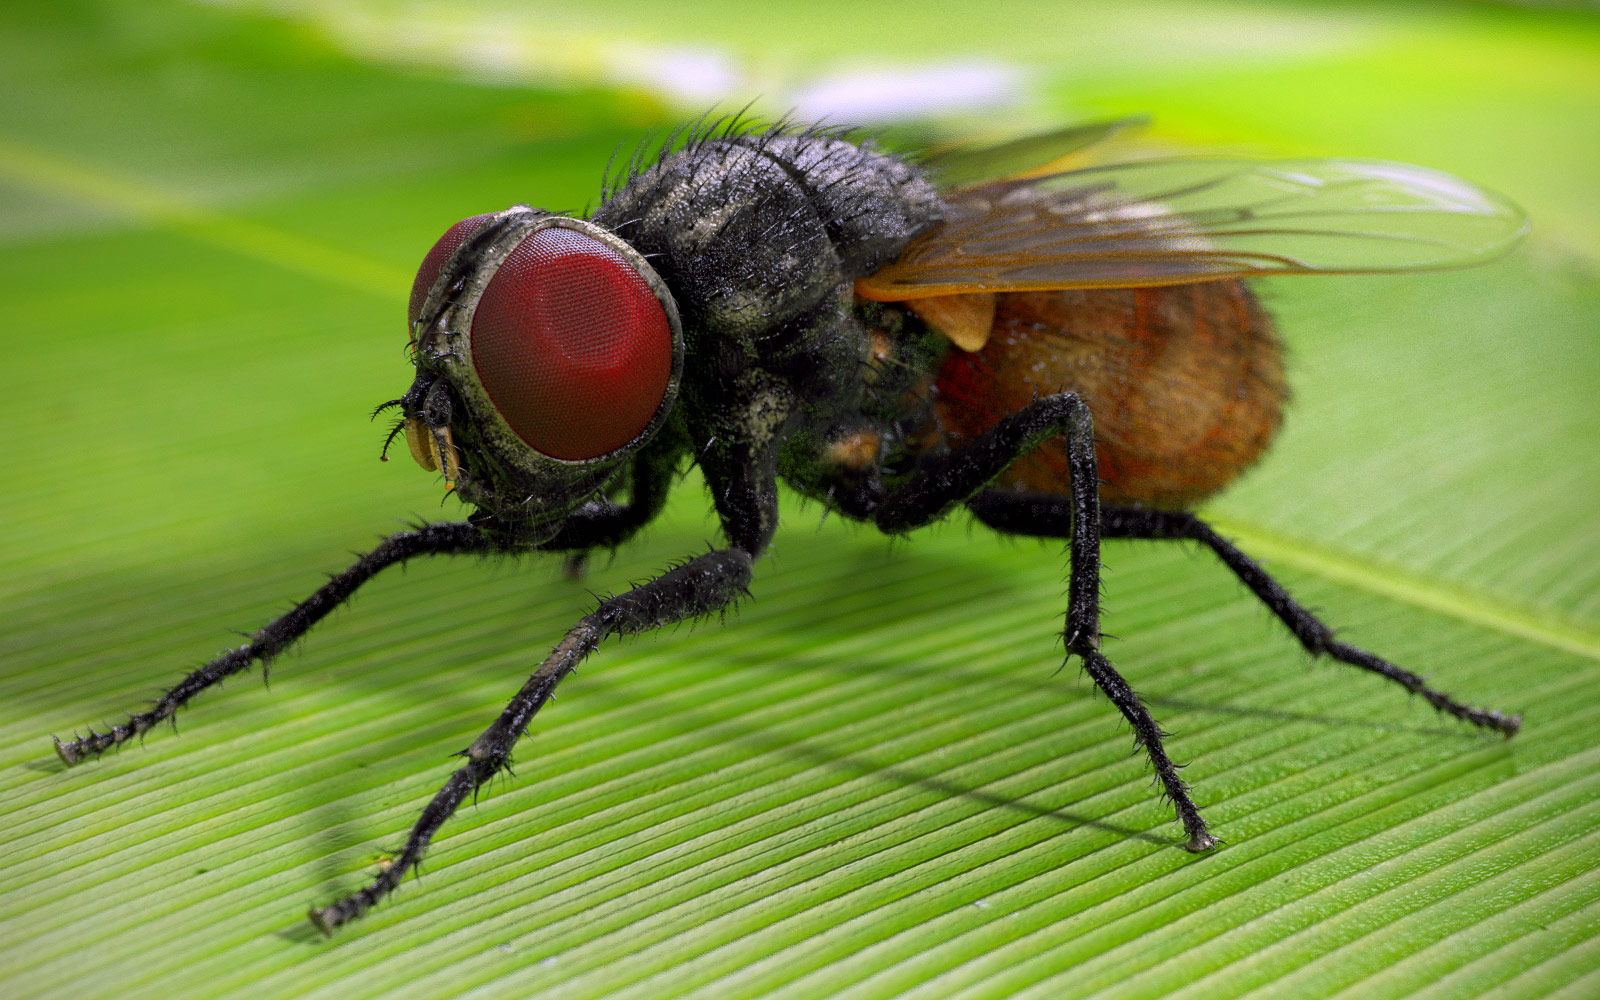 Houseflies are musical, and never are out of tune. Bonus: They're always in the key of "F".